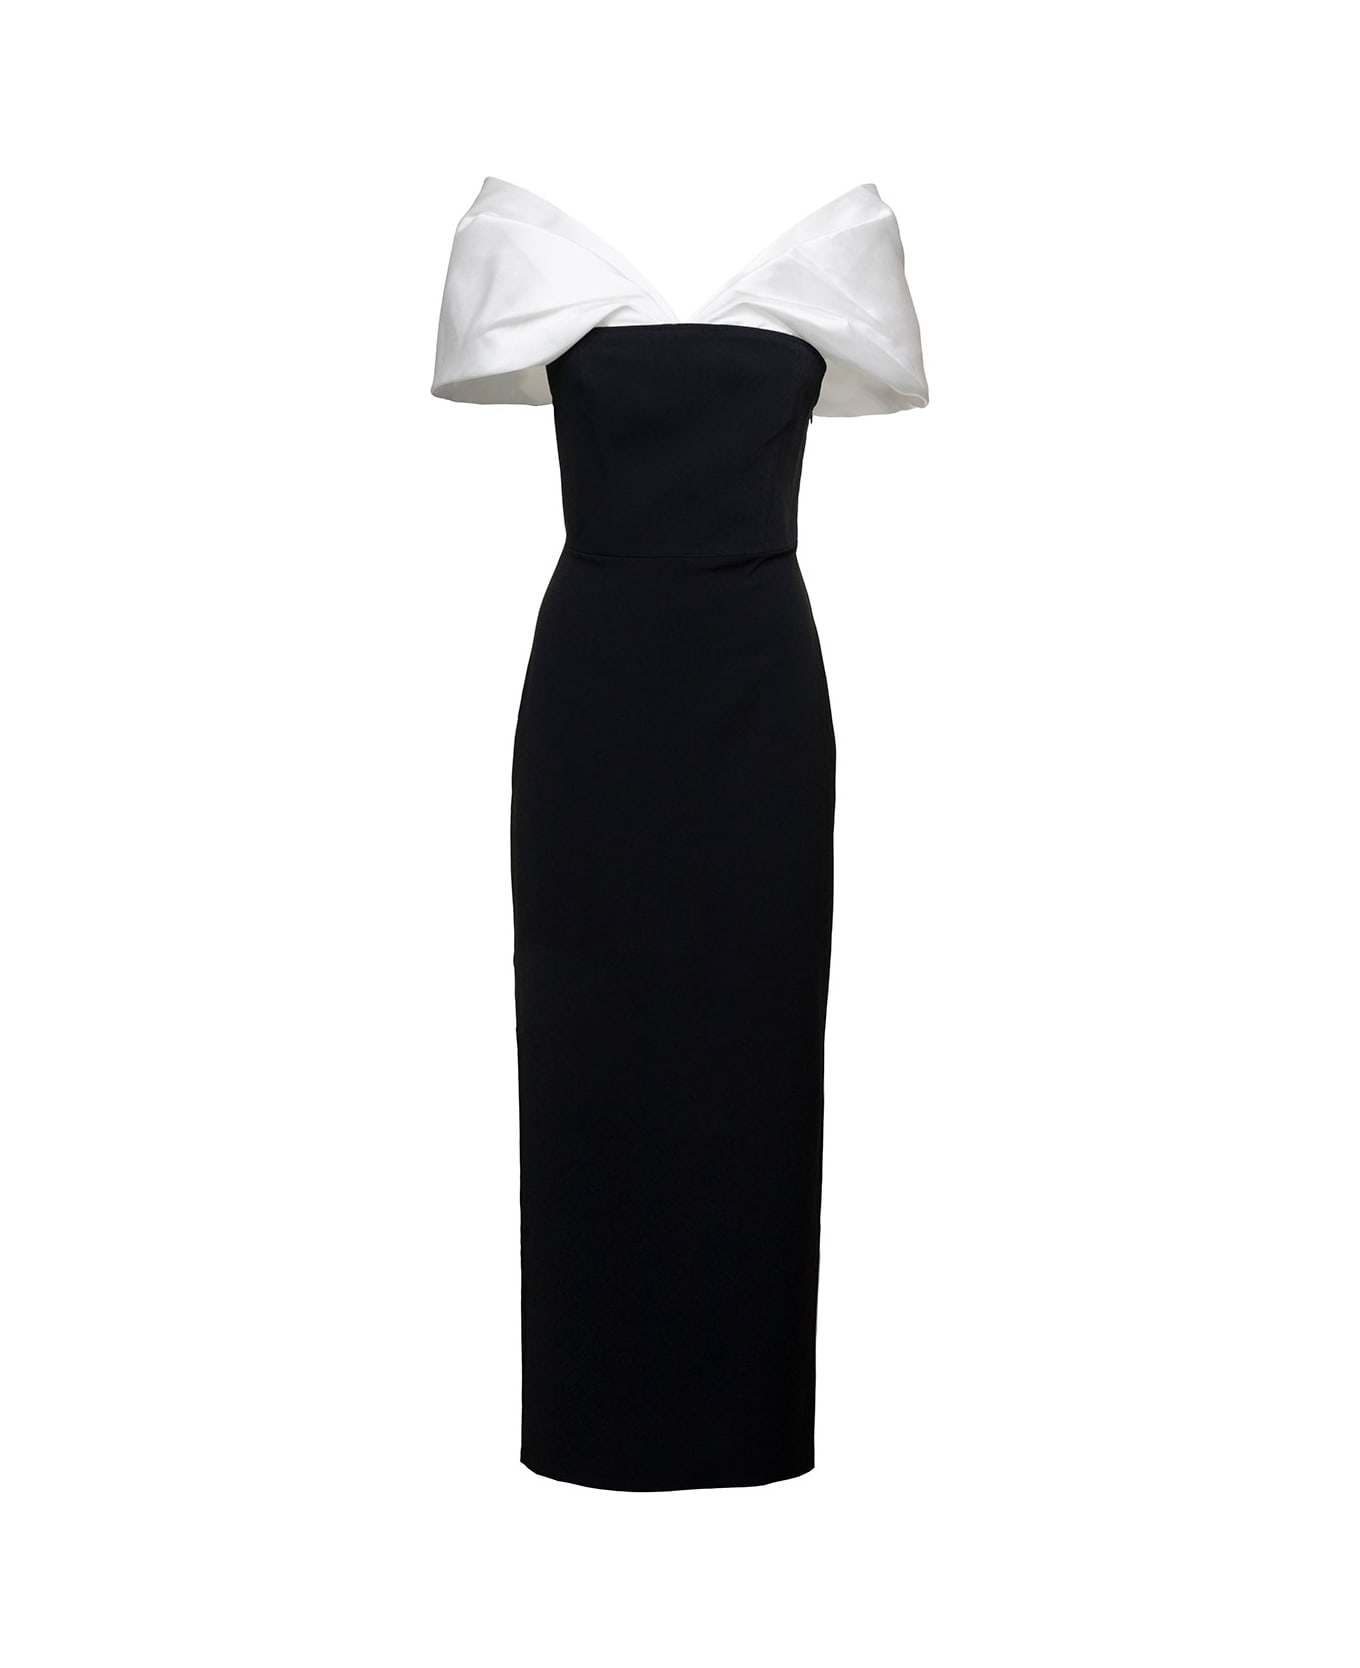 Solace London 'dakota' Maxi Black Dress With Off-shoulder Neckline And Satin Inserts In Polyester Woman - Black ワンピース＆ドレス